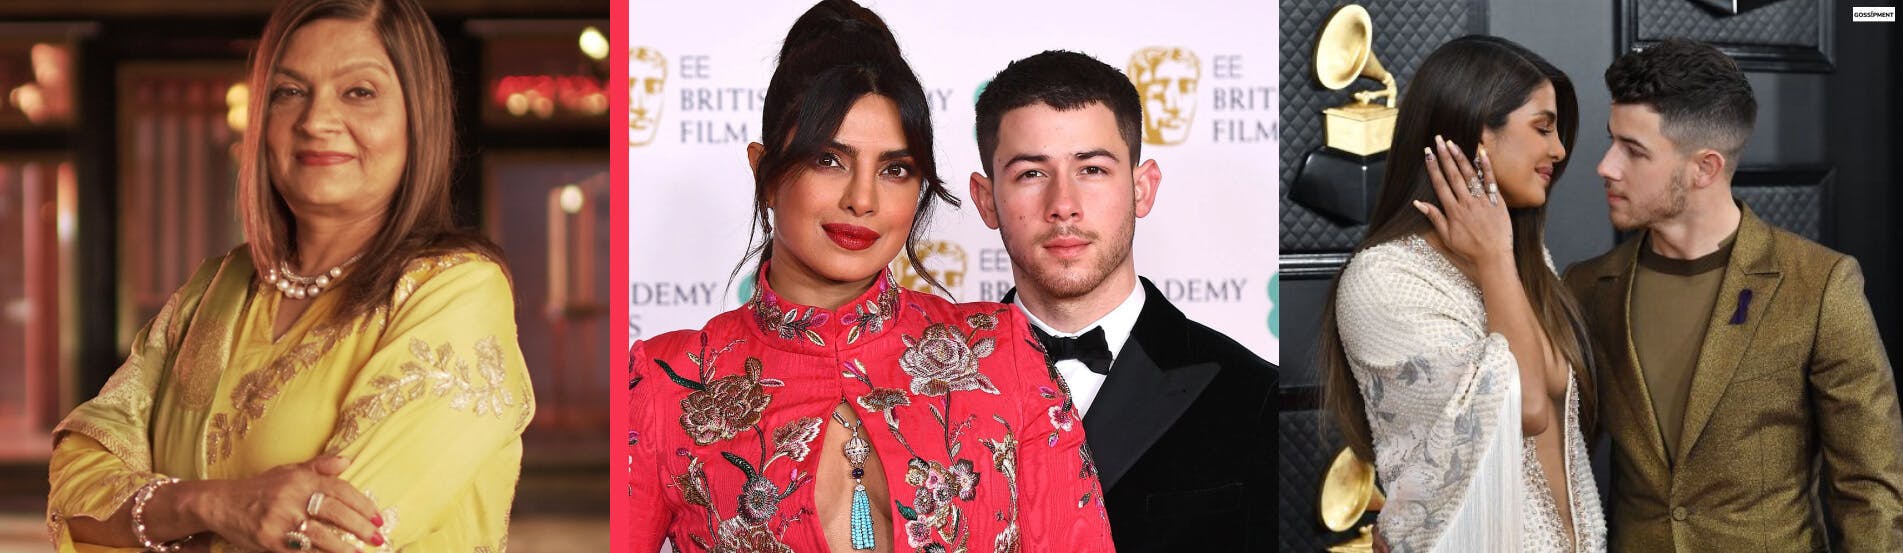 Cover Image for “Nick looks small and petite, Priyanka looks elder!” Indian Matchmaker Sima Taparia’s shocking statement